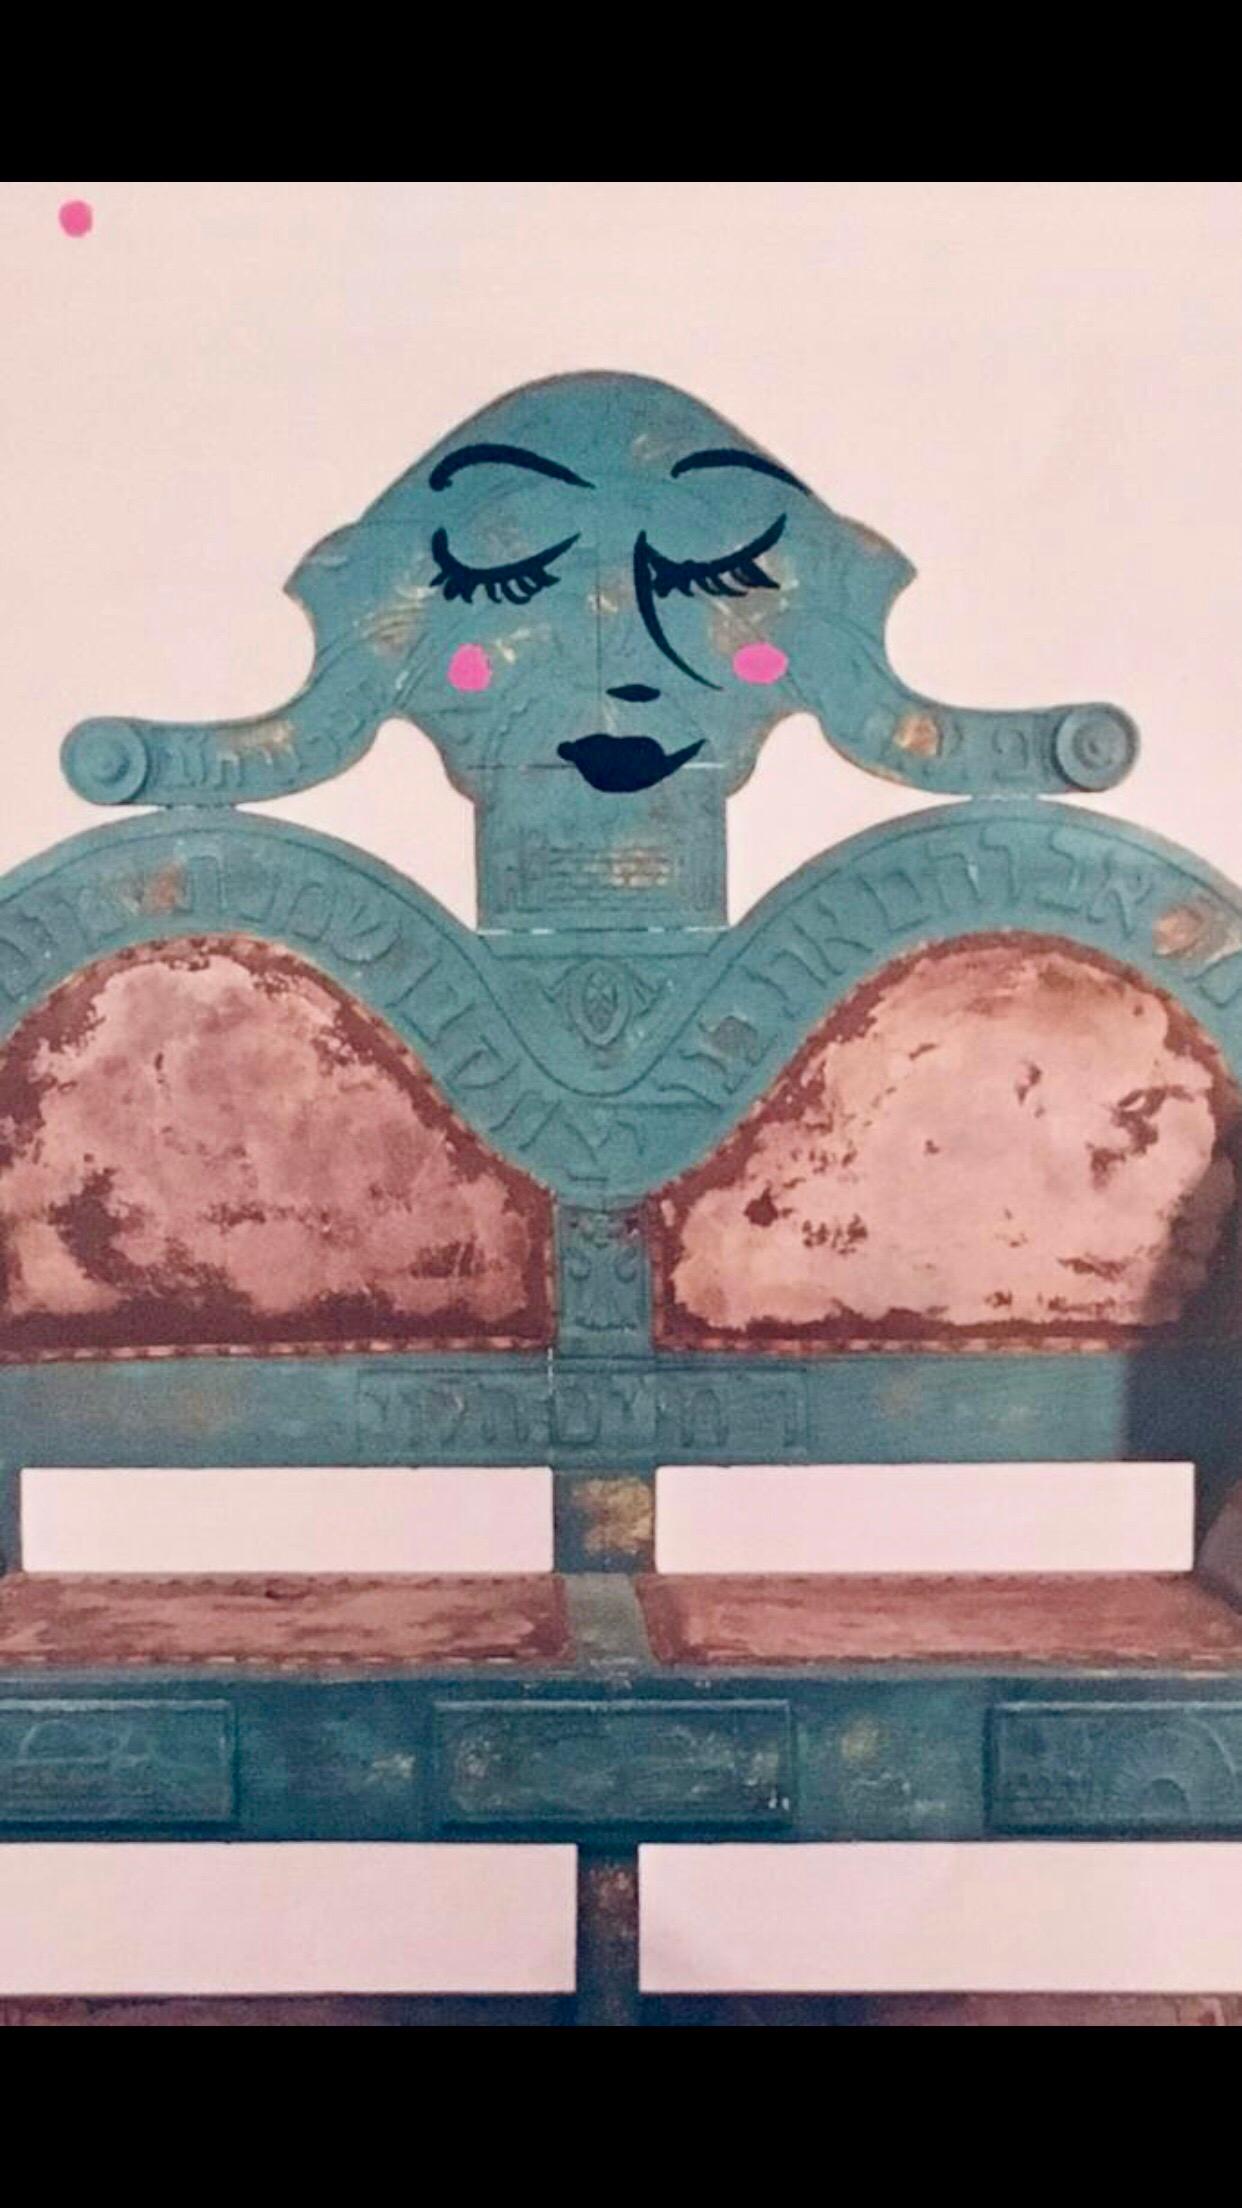 This is a take on an ad featuring an antique judaic carved wood circumcision chair from the community of Hebron is Israel. titled Mama with Challah.

The bold and eclectic work of self taught artist Ephraim Wuensch is part social commentary part